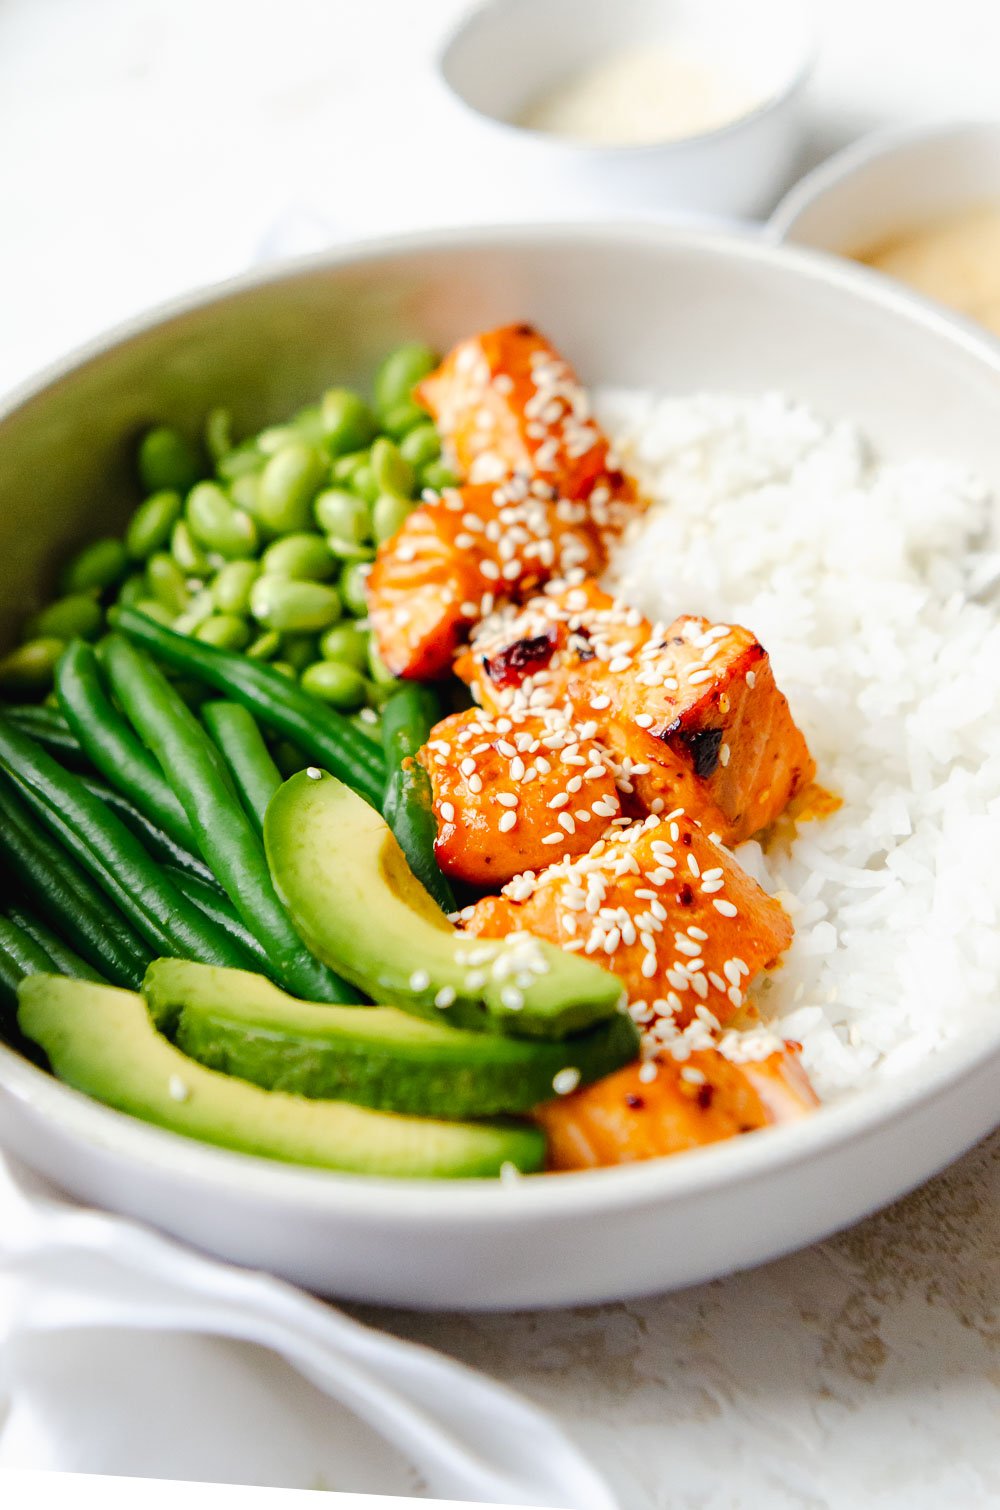 Hot honey salmon bites in a white bowl with white rice, avocado slices, string beans, edamame and is garnished with sesame seeds.